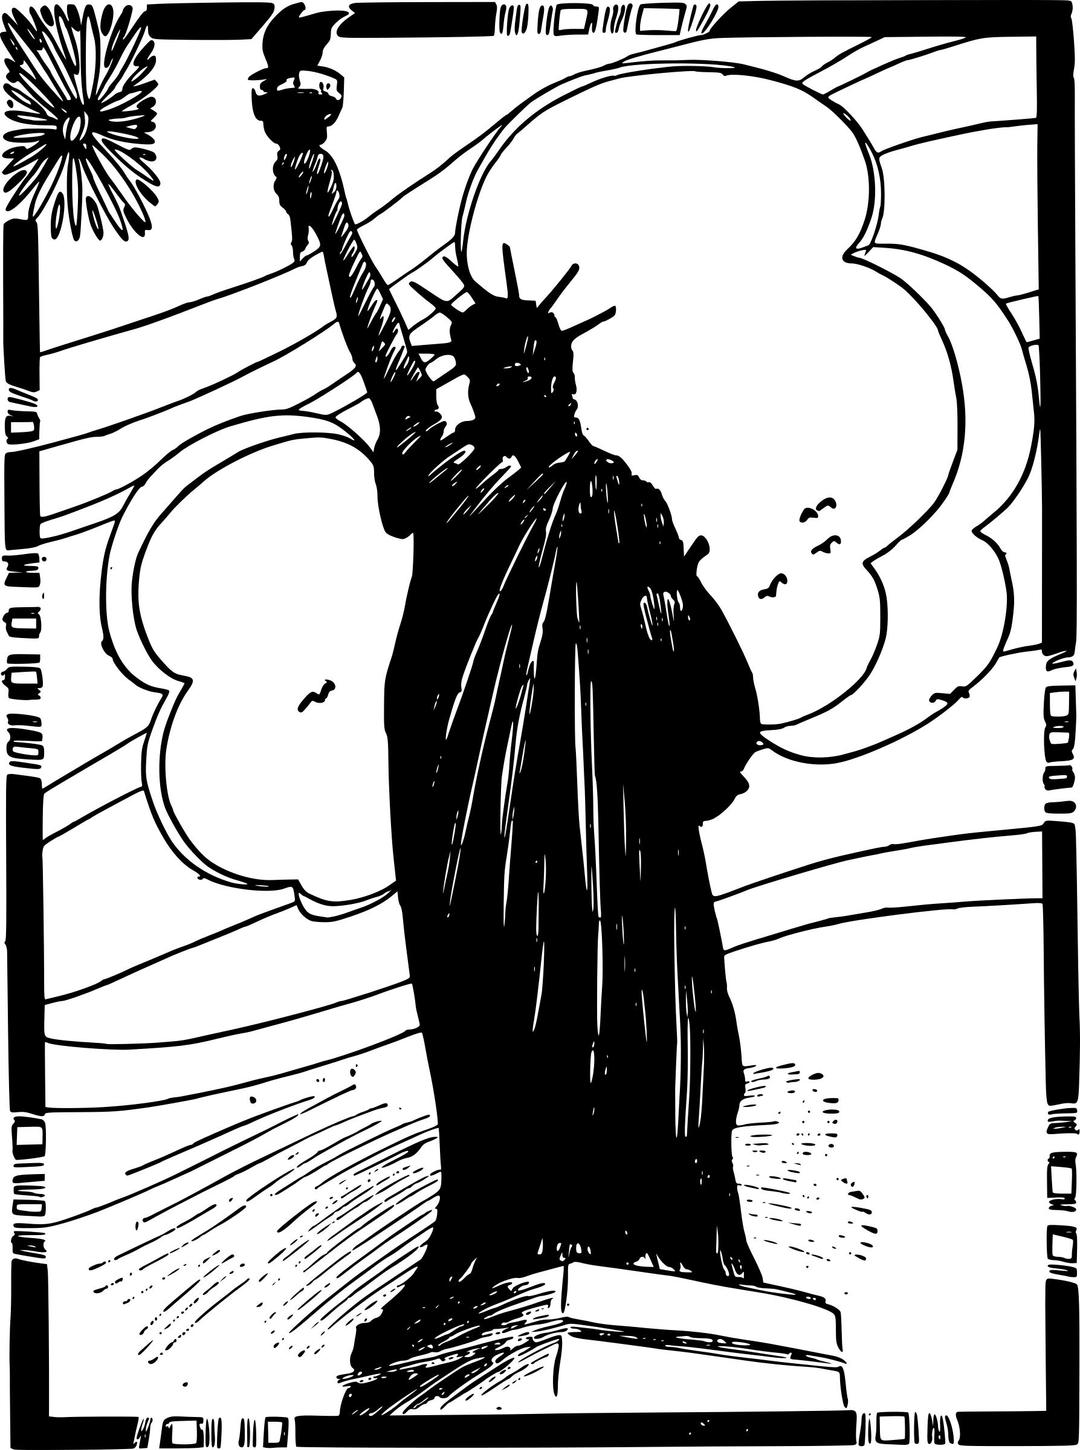 Statue of Liberty - Square png transparent